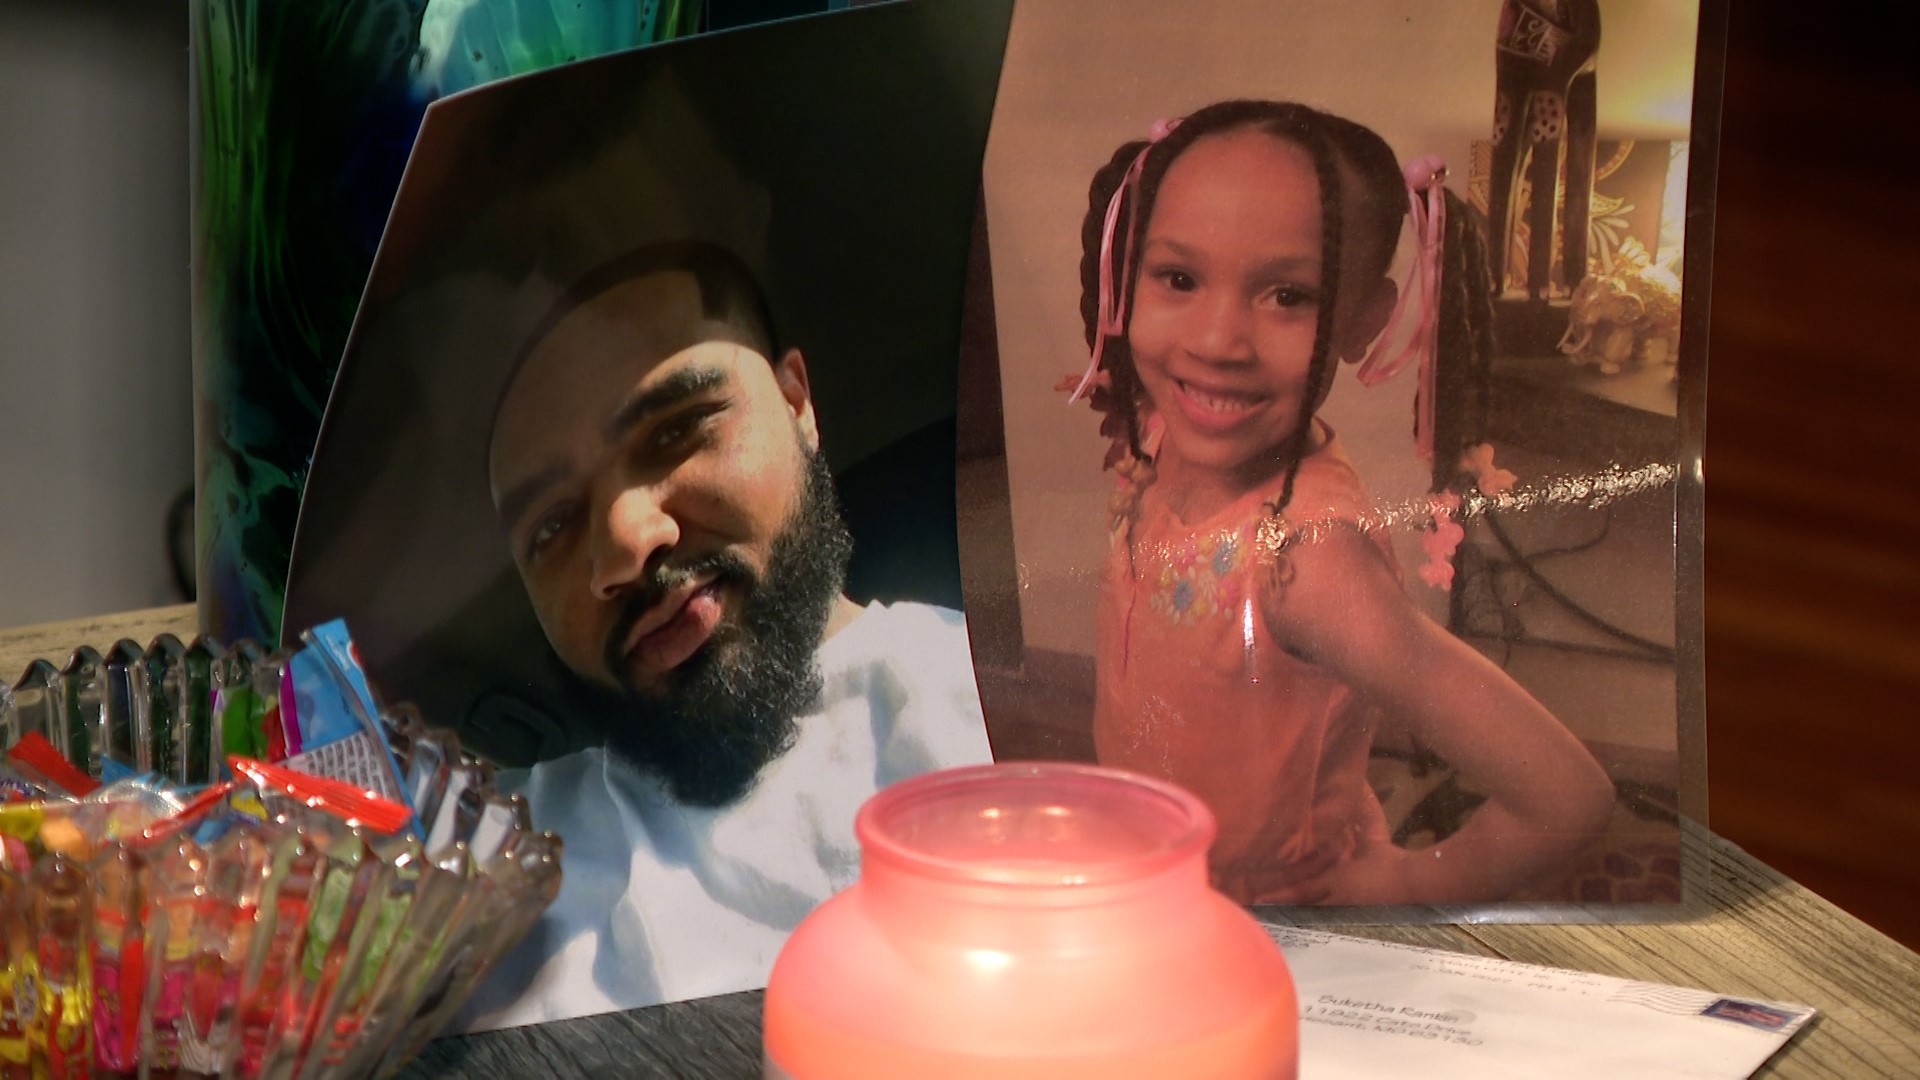 A grandmother and mother are making an emotional plea to end gun violence after Dmyah Fleming and her father were fatally shot in January 2021.